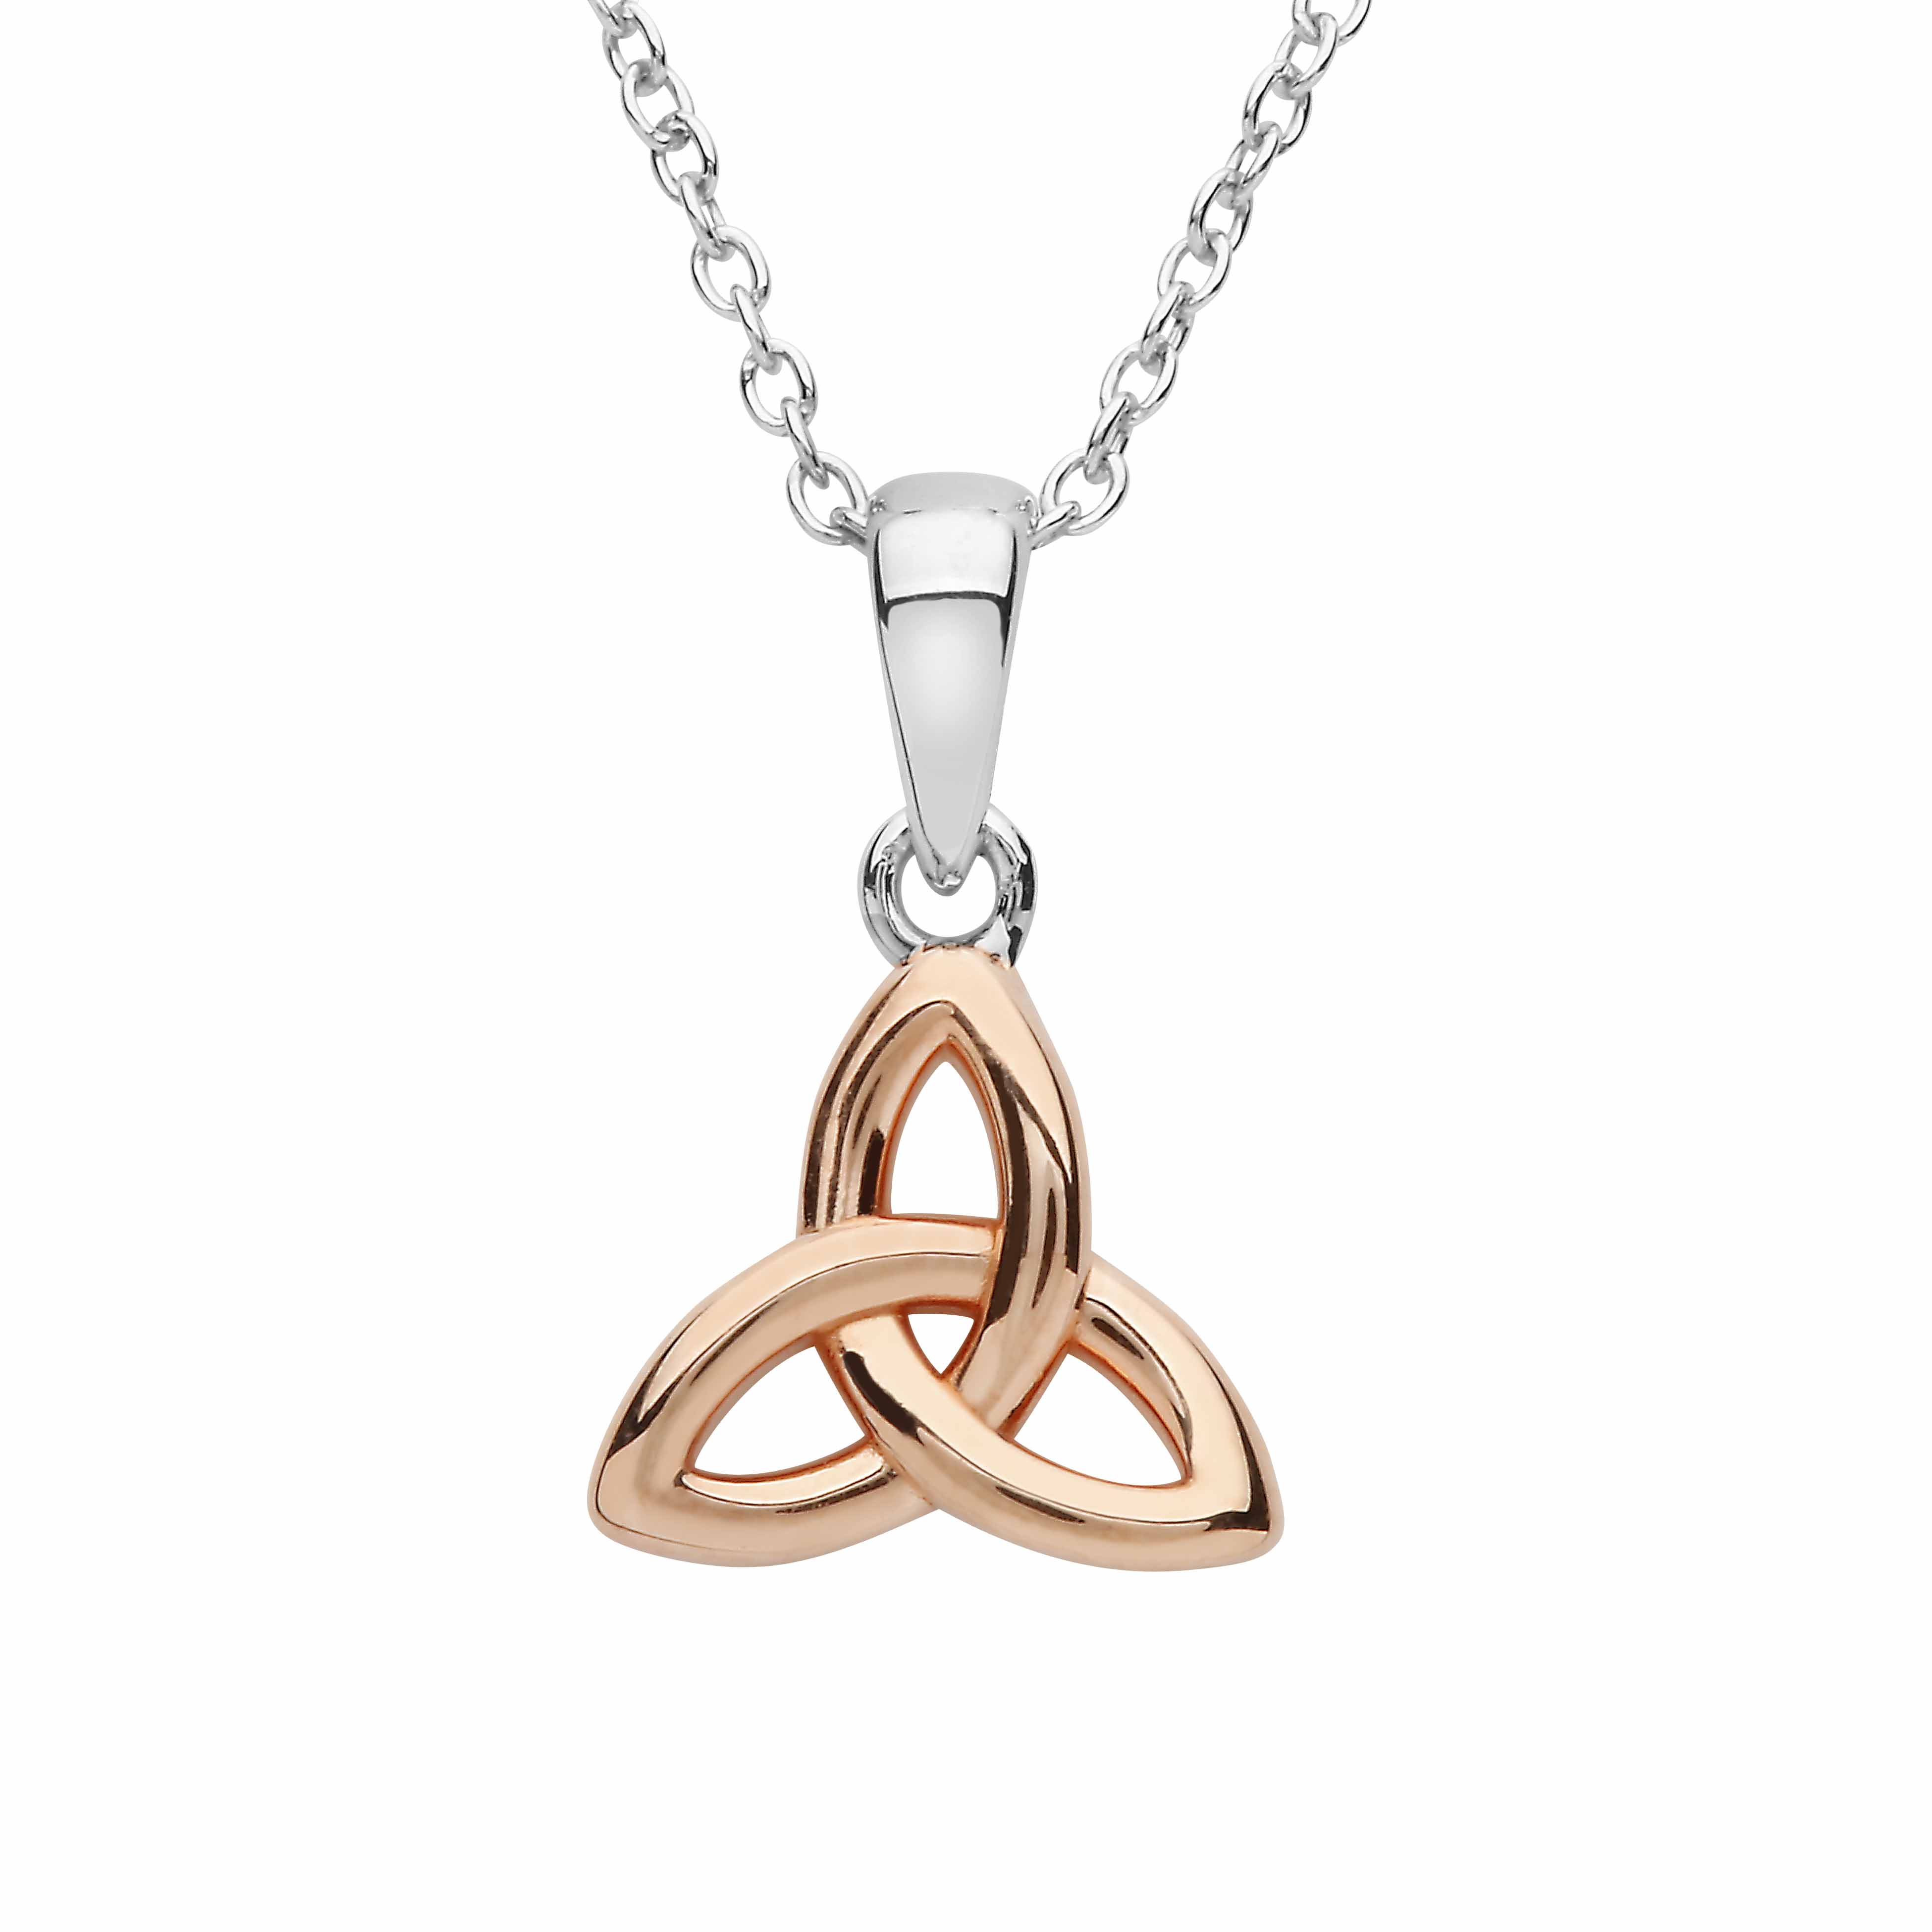 Product image for Irish Necklace | Sterling Silver Rose Gold Trinity Knot Pendant